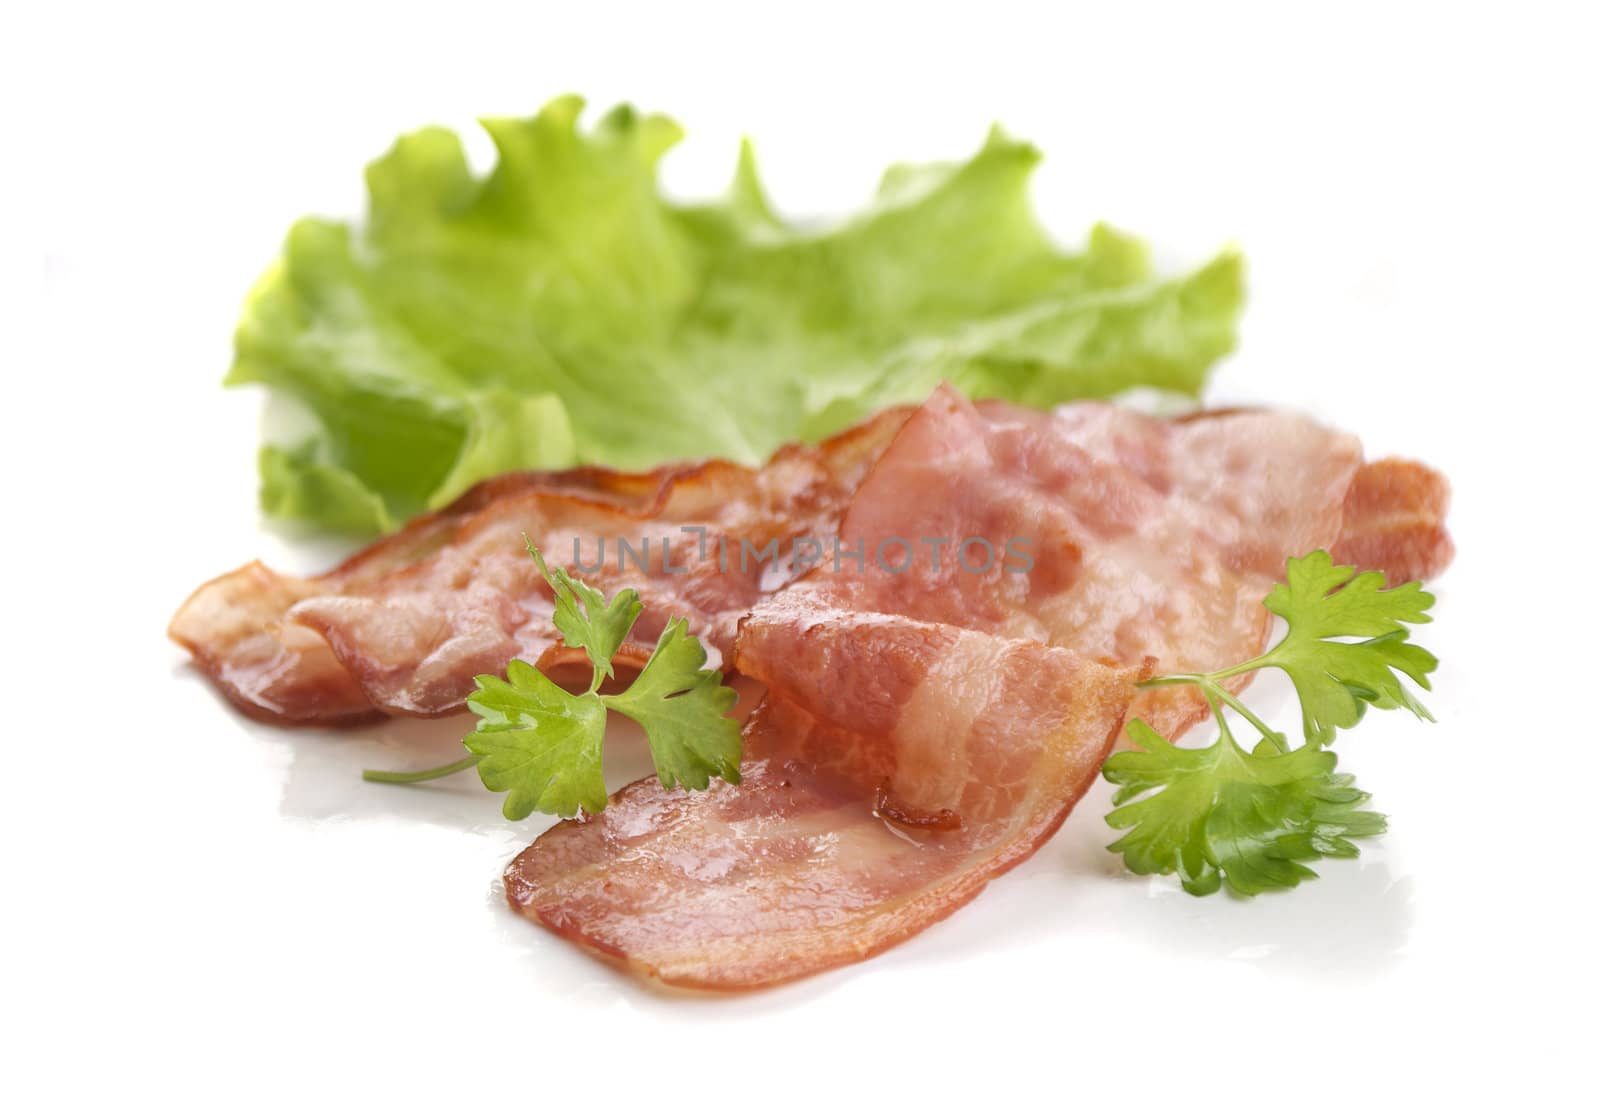 Two pieces of fried bacon with parsley and lettuce on the white